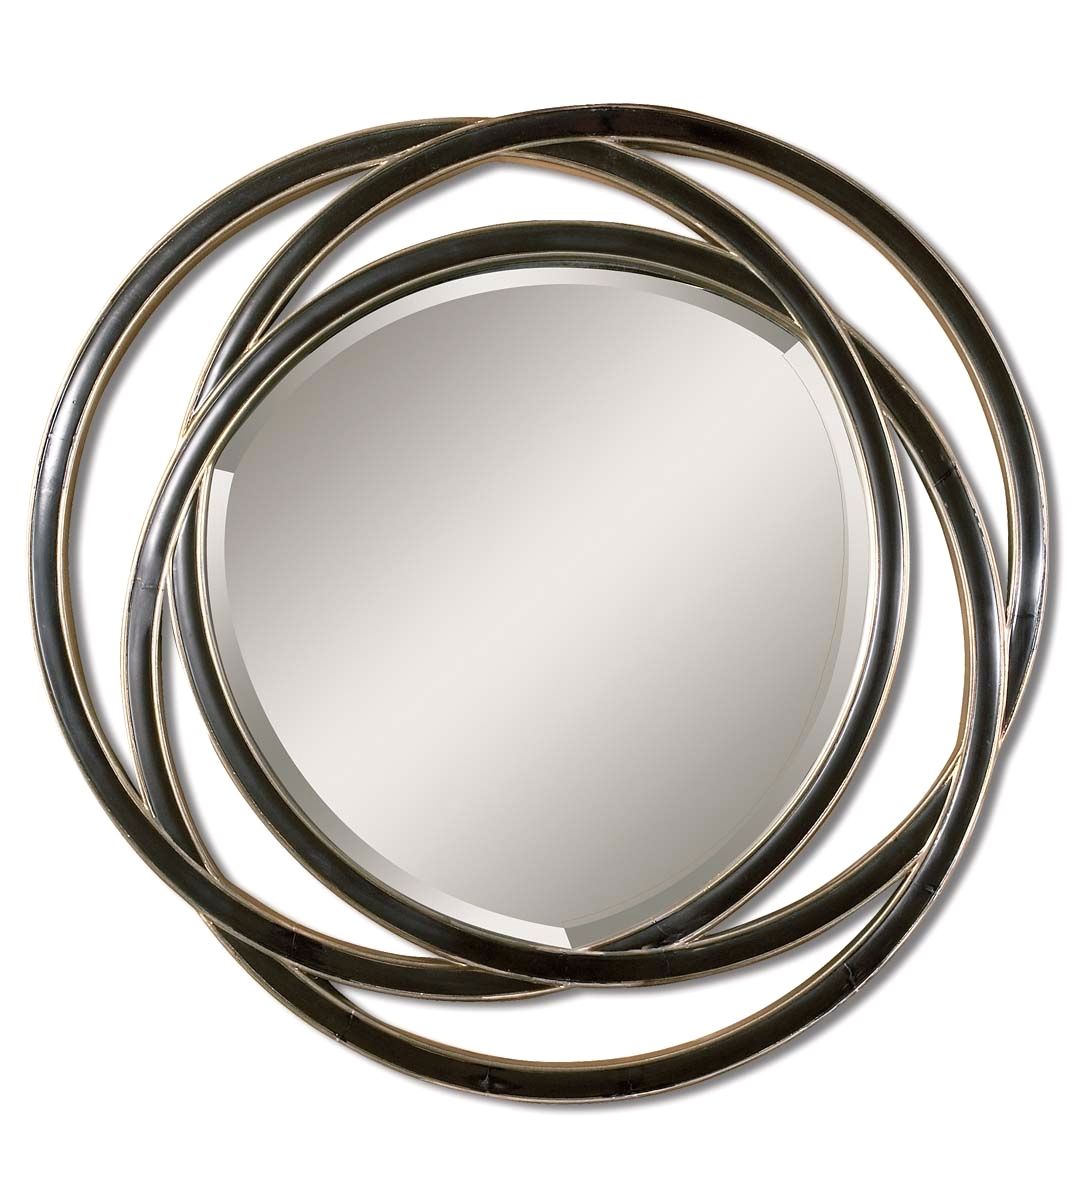 Odalis Modern Matte Black Round Mirror With Overlapping Circle Frame Intended For Matte Black Led Wall Mirrors (View 10 of 15)